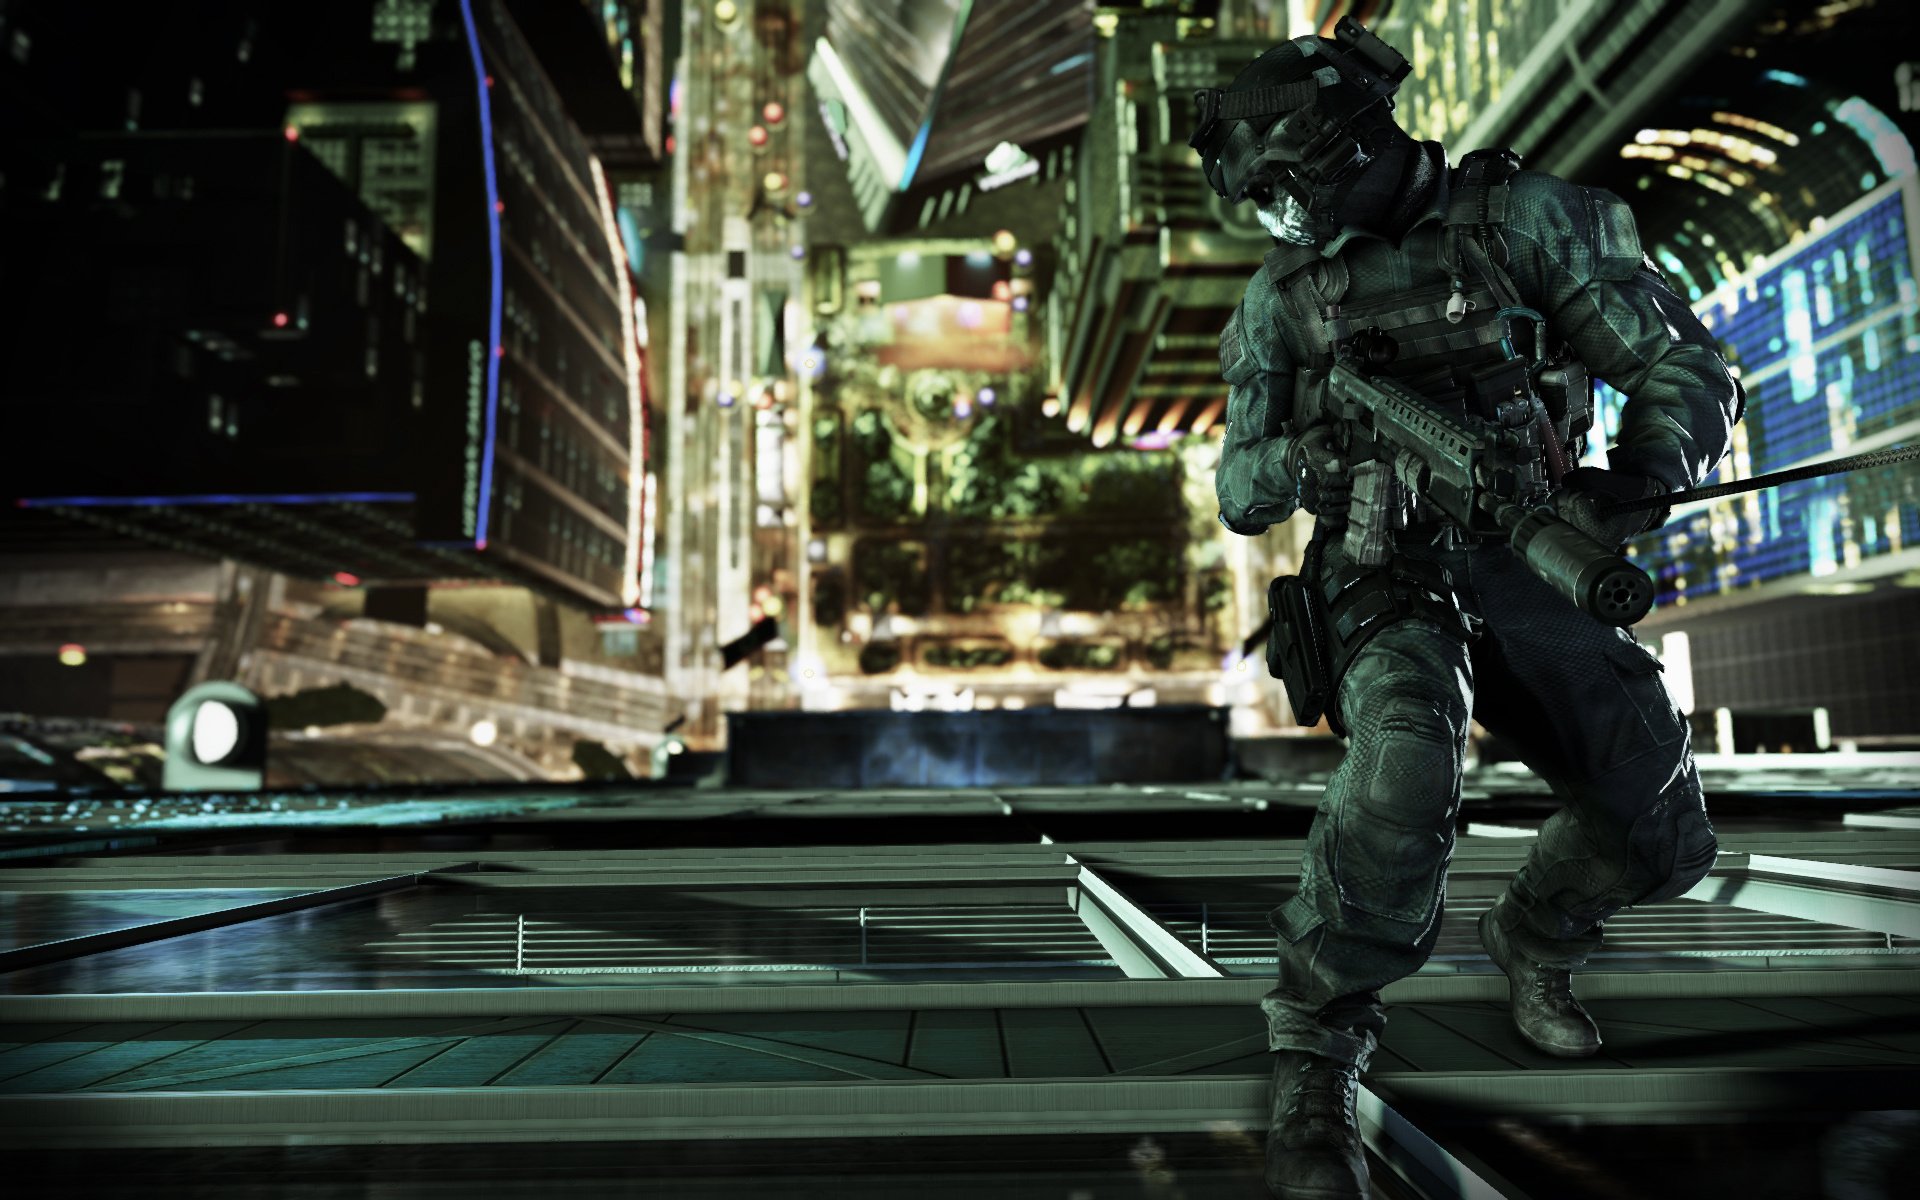 Call of Duty: Ghosts PS4 Review